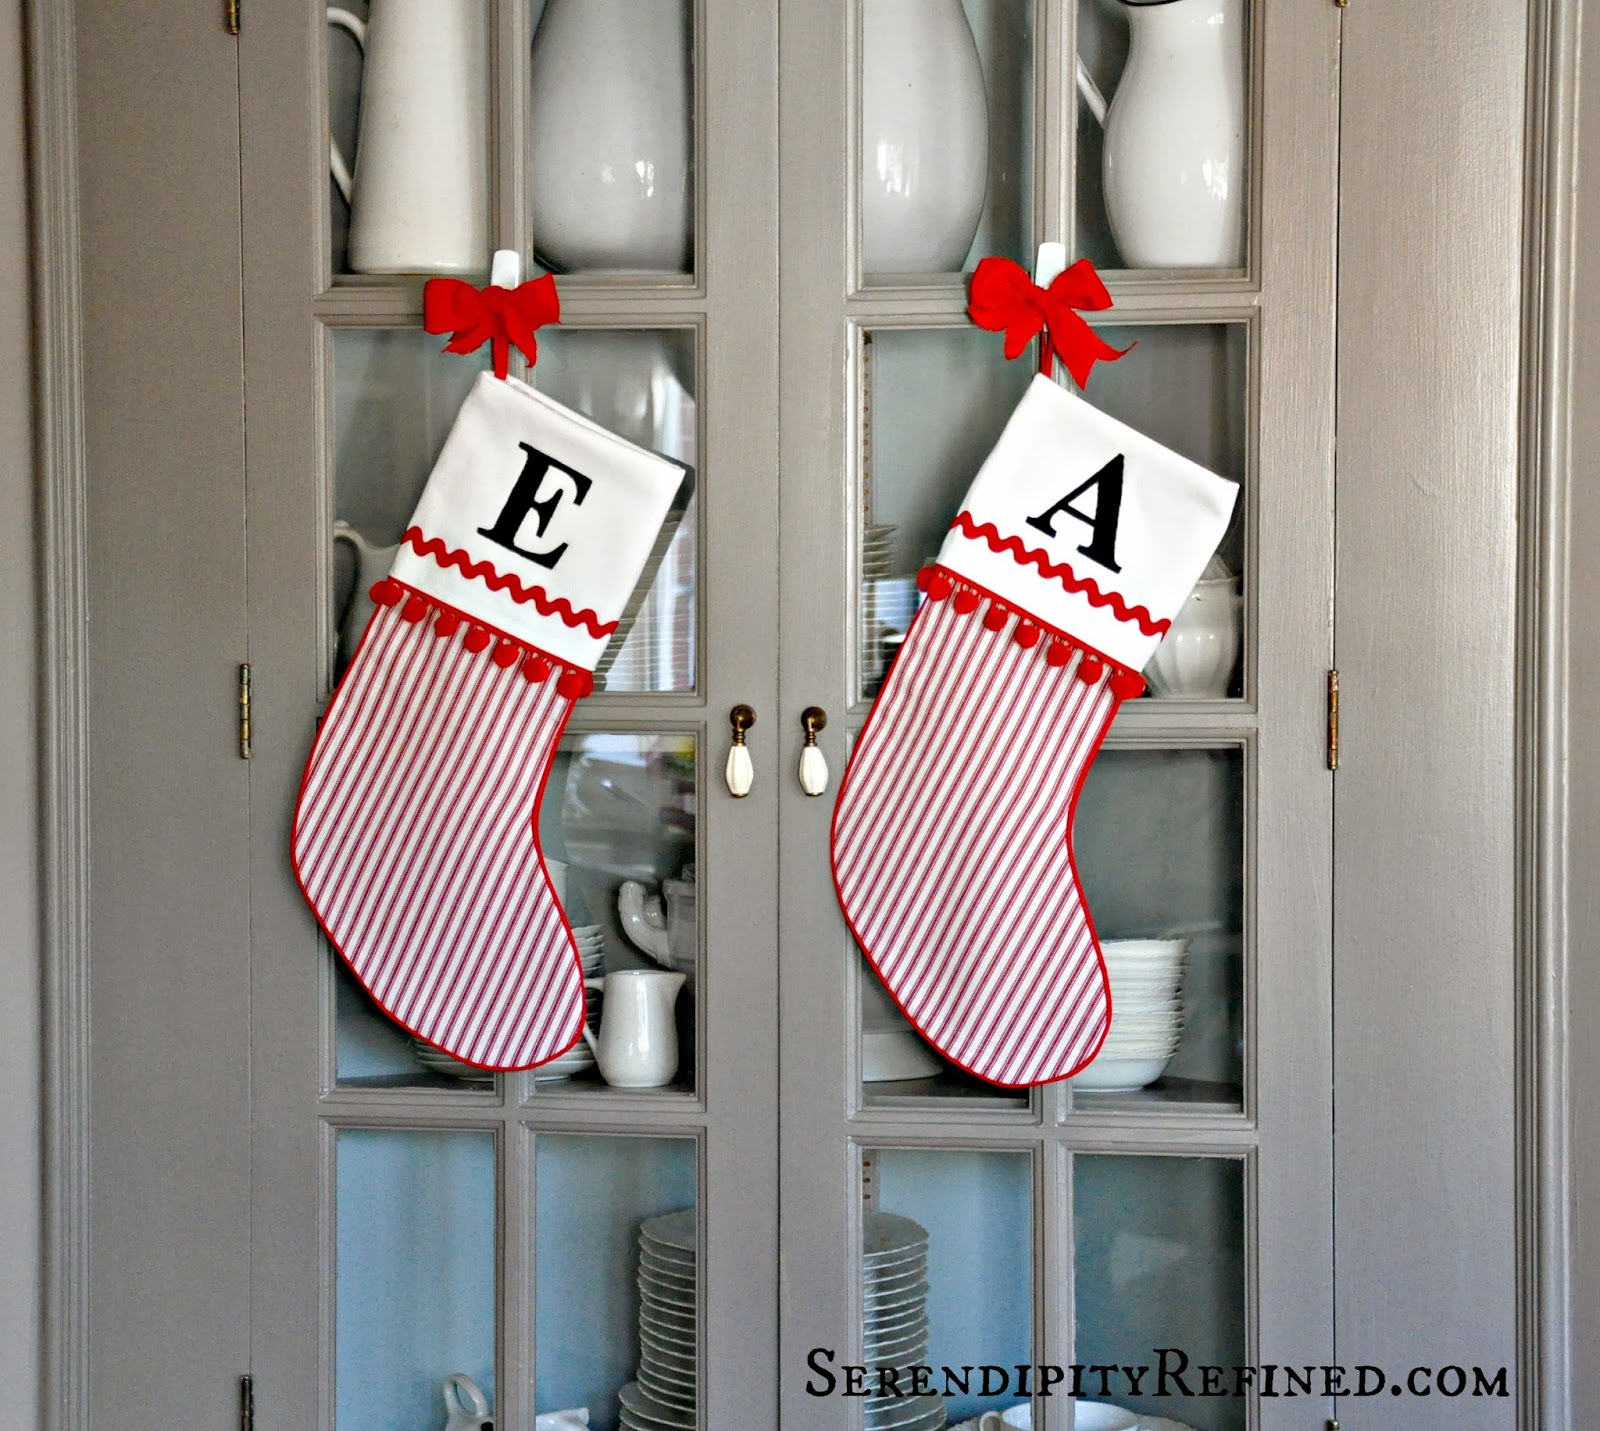 Serendipity Refined Blog: How to Make A Christmas Stocking (Free Pattern)